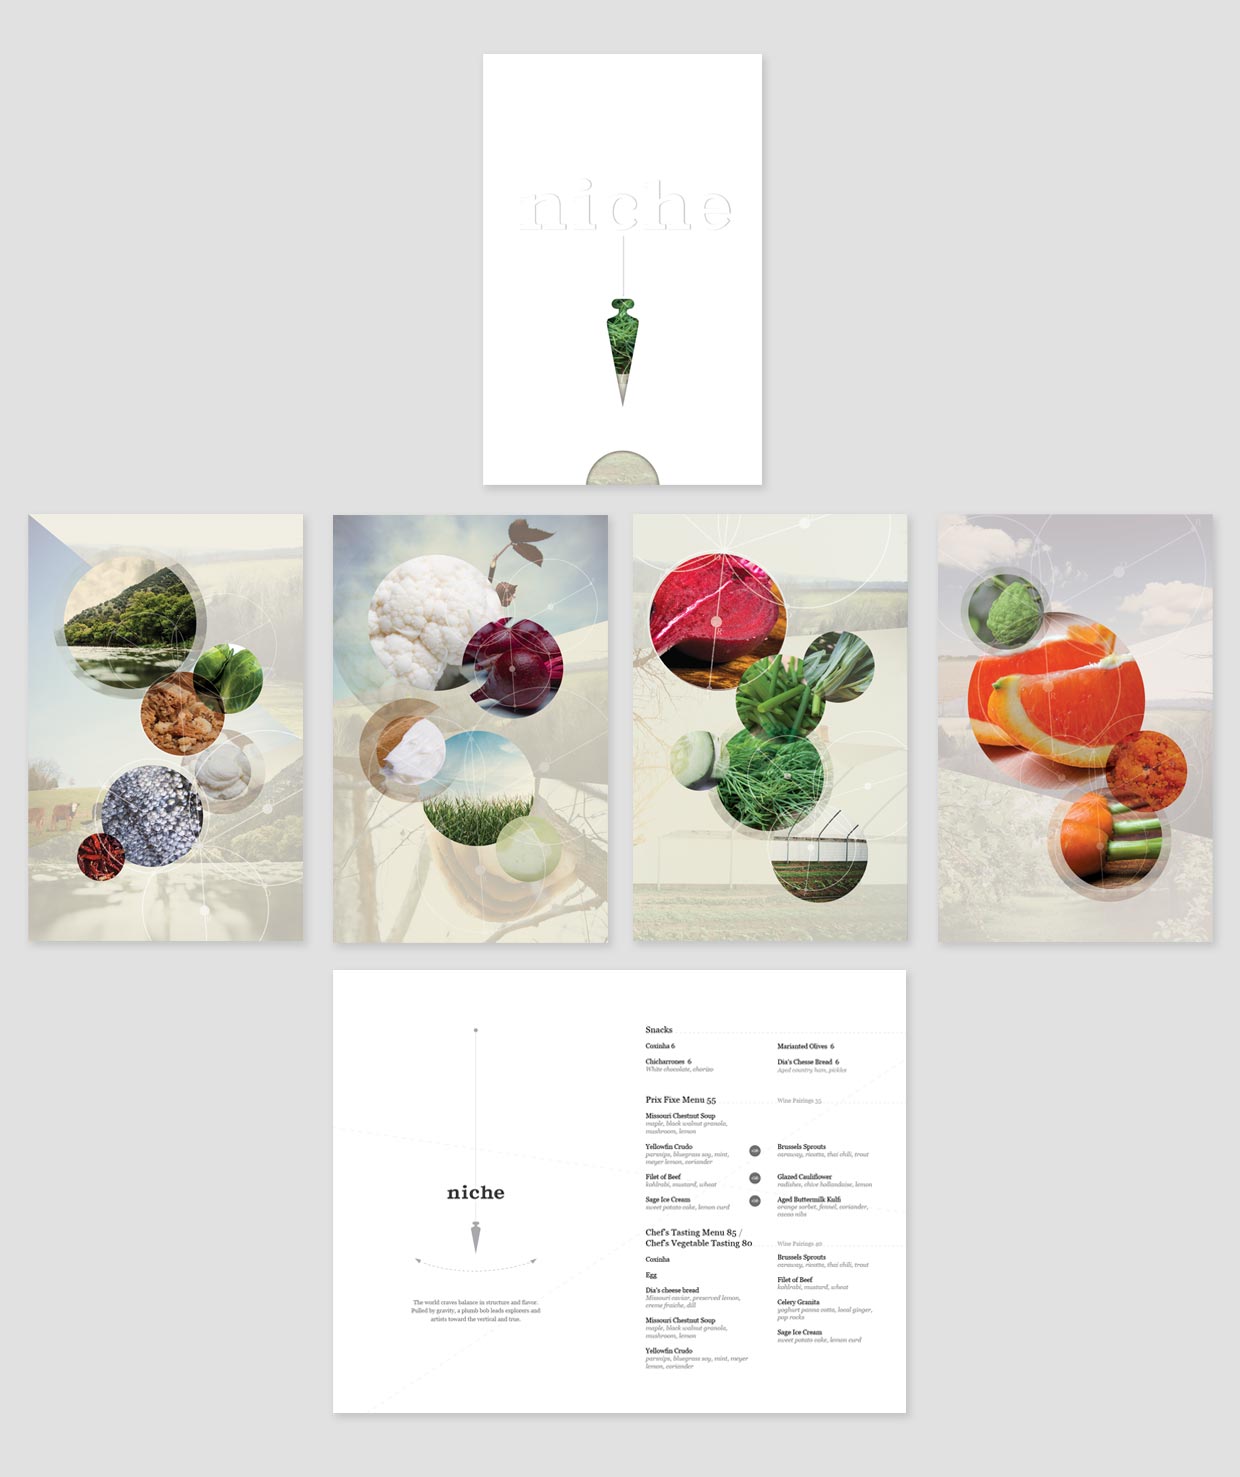 For Niche, we visually deconstructed the recipes into separate ingredients and displayed them on the menus